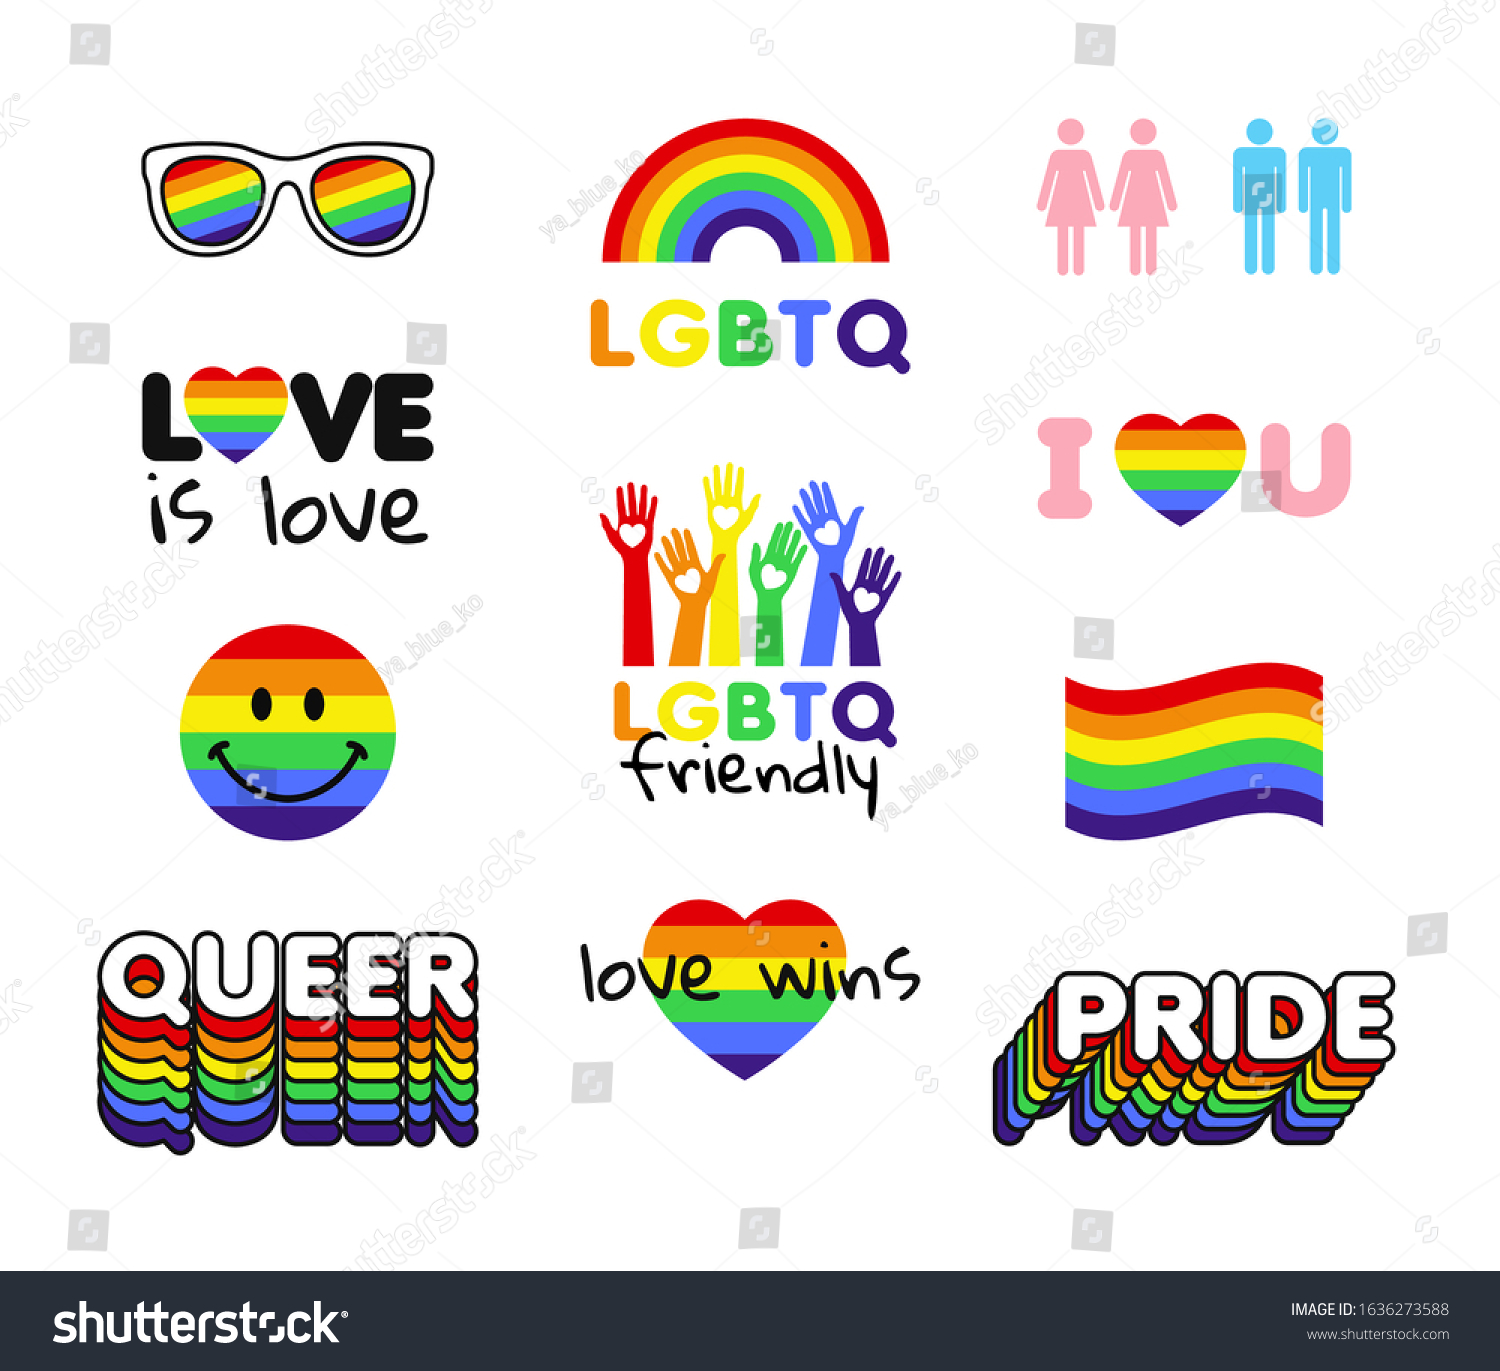 Lgbt Pride Icons Stickers Vector Stock Vector Royalty Free 1636273588